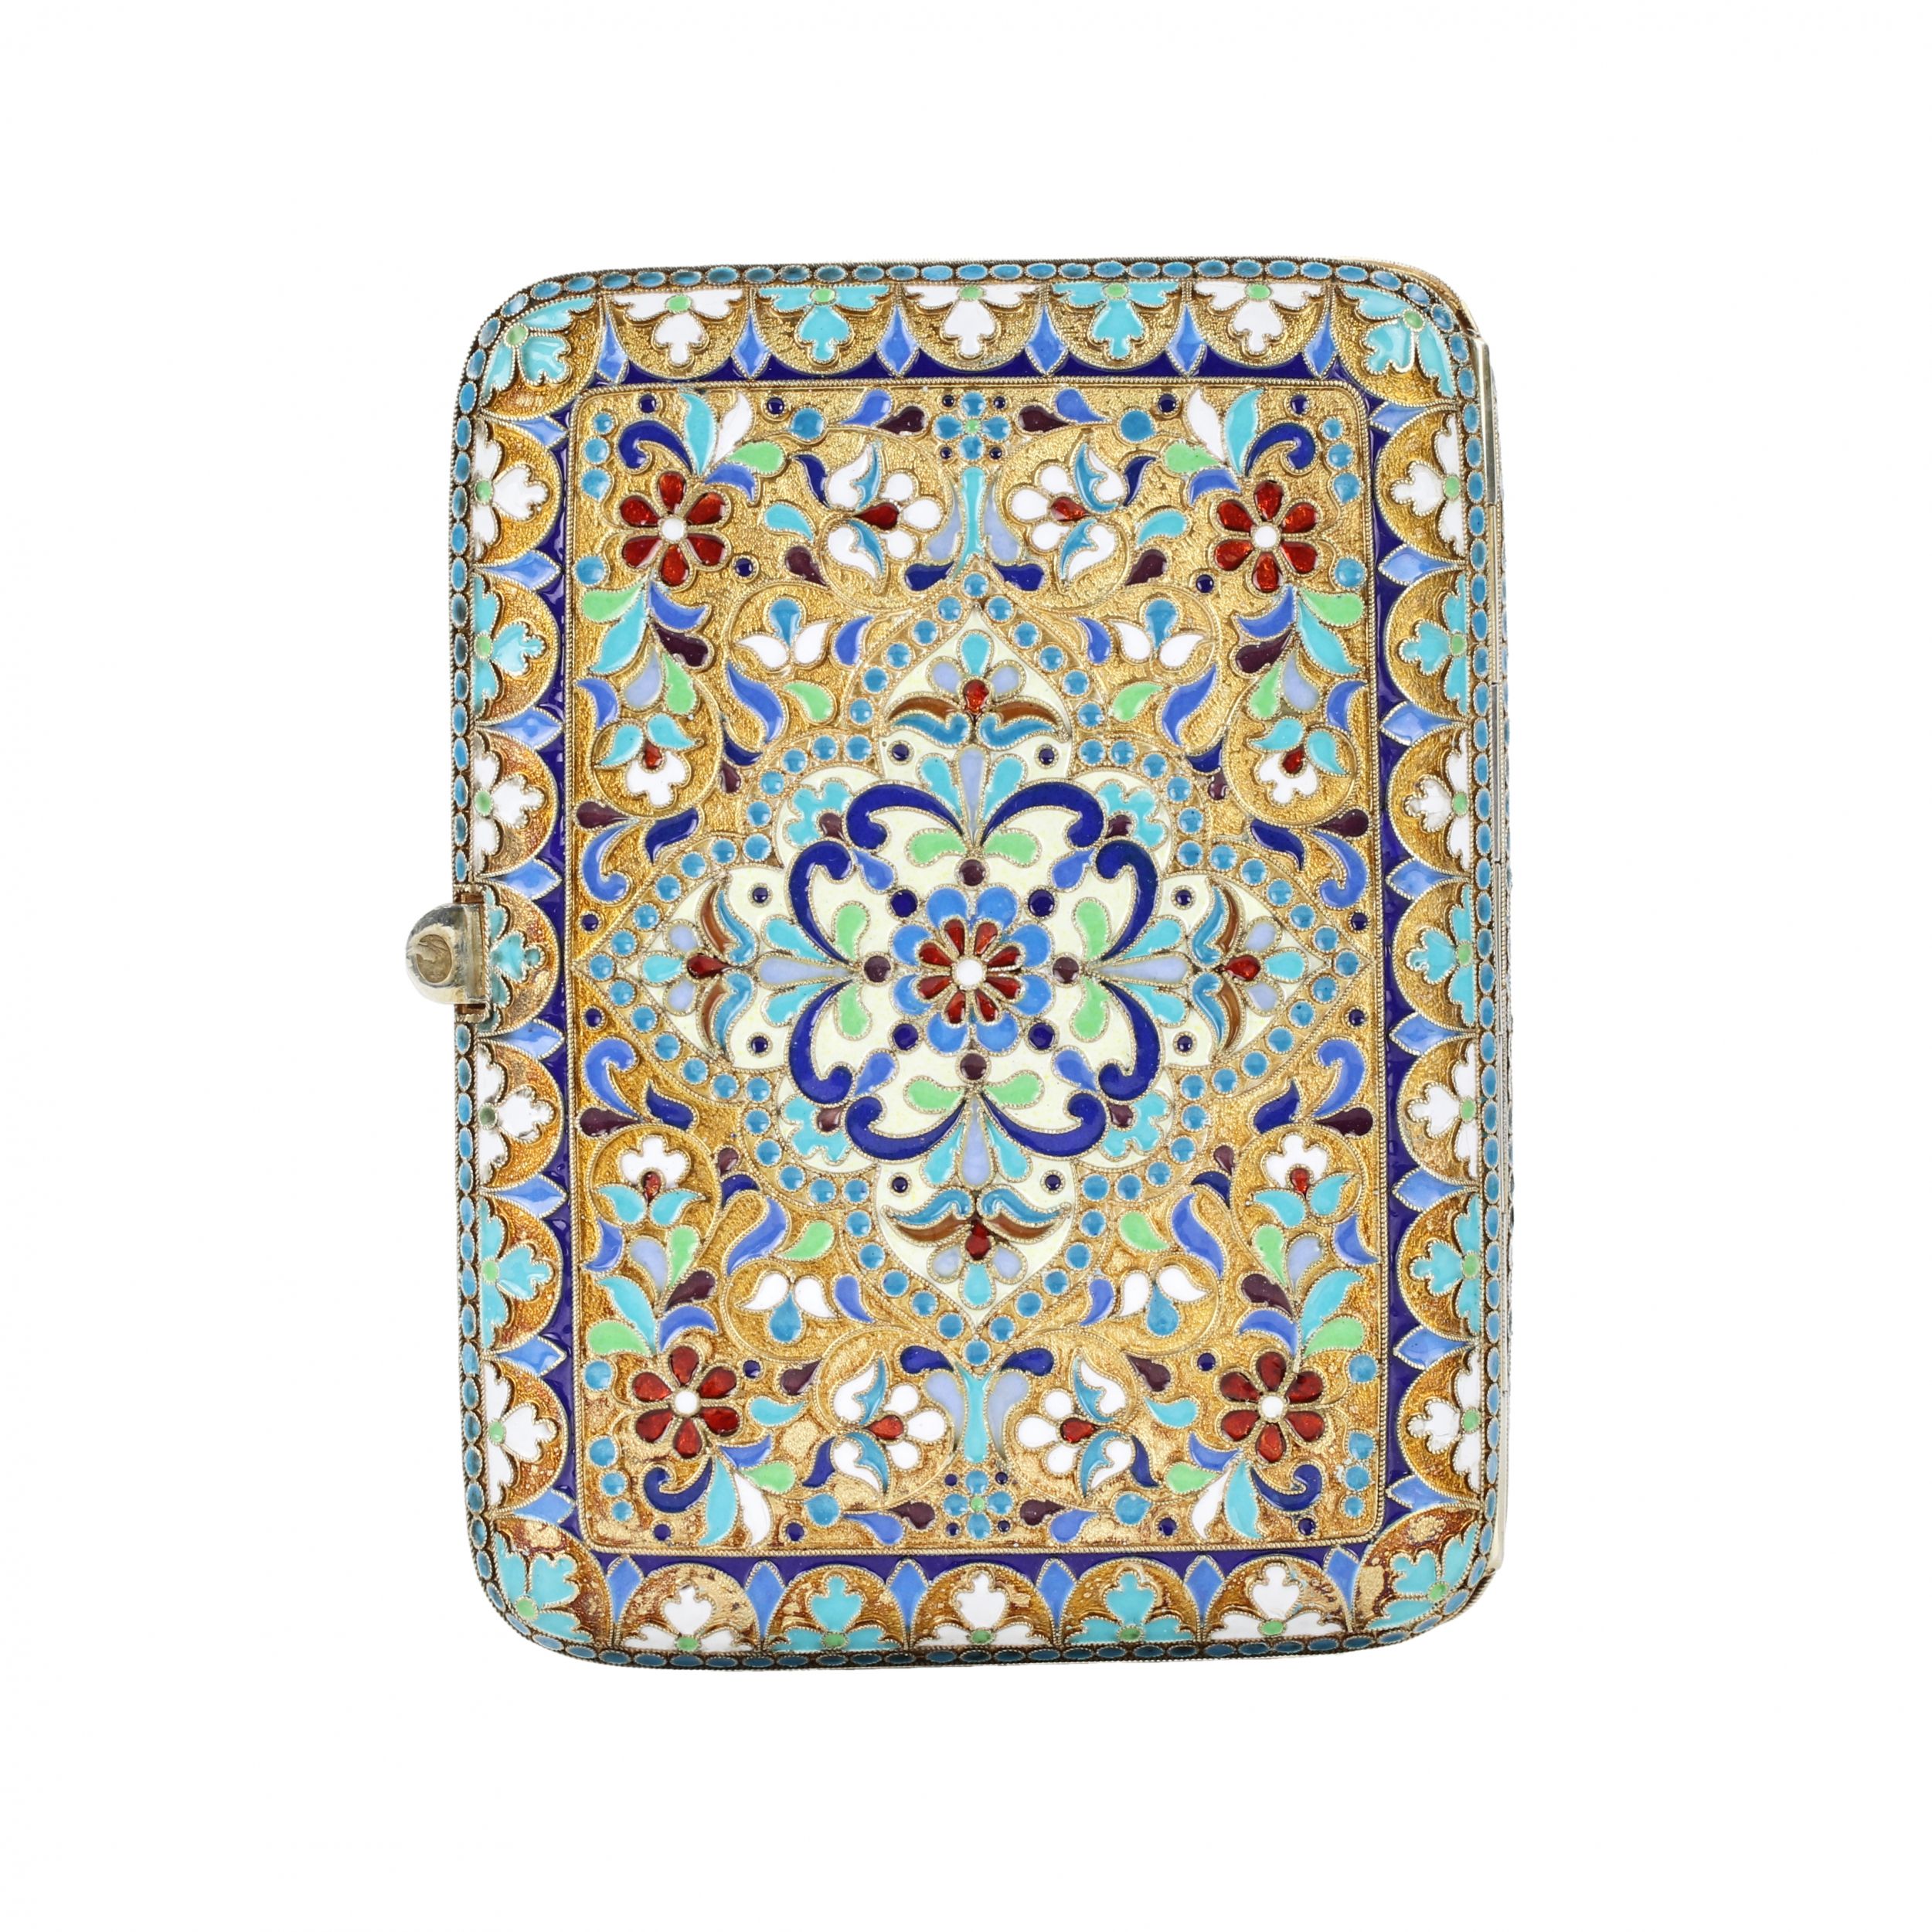 Silver cigarette case with gilding and cloisonne enamels. - Image 6 of 12